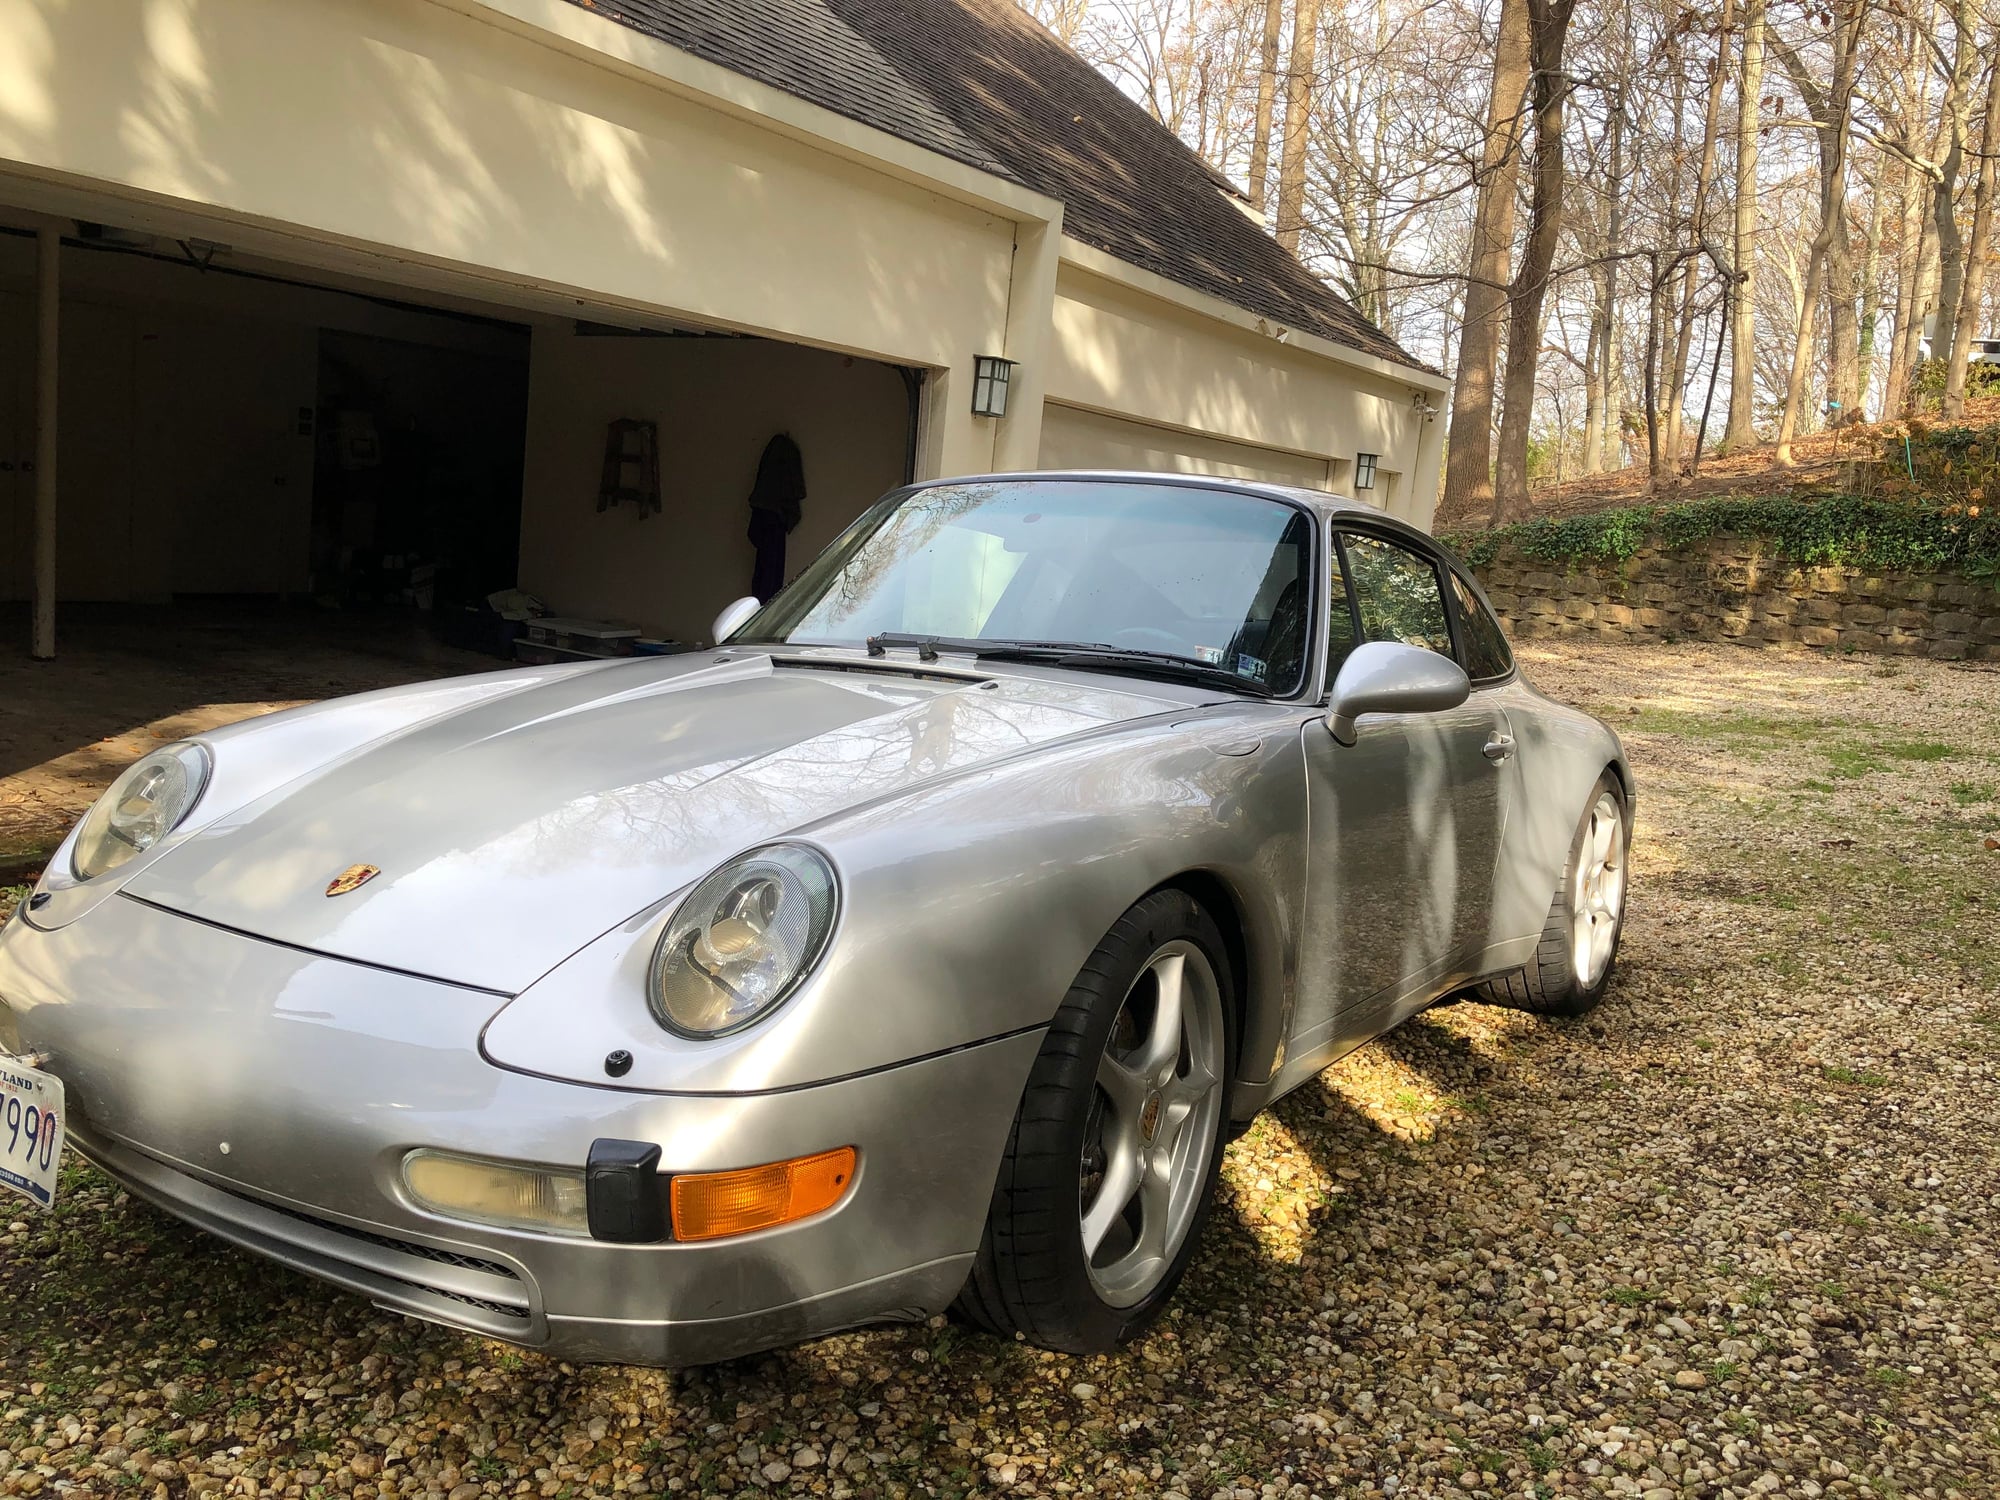 1997 Porsche 911 - 1997 911 993 C2 Arctic Silver w recent top-end rebuild - Used - VIN WP0AA2997VS320619 - 6 cyl - 2WD - Manual - Coupe - Silver - Baltimore, MD 21210, United States